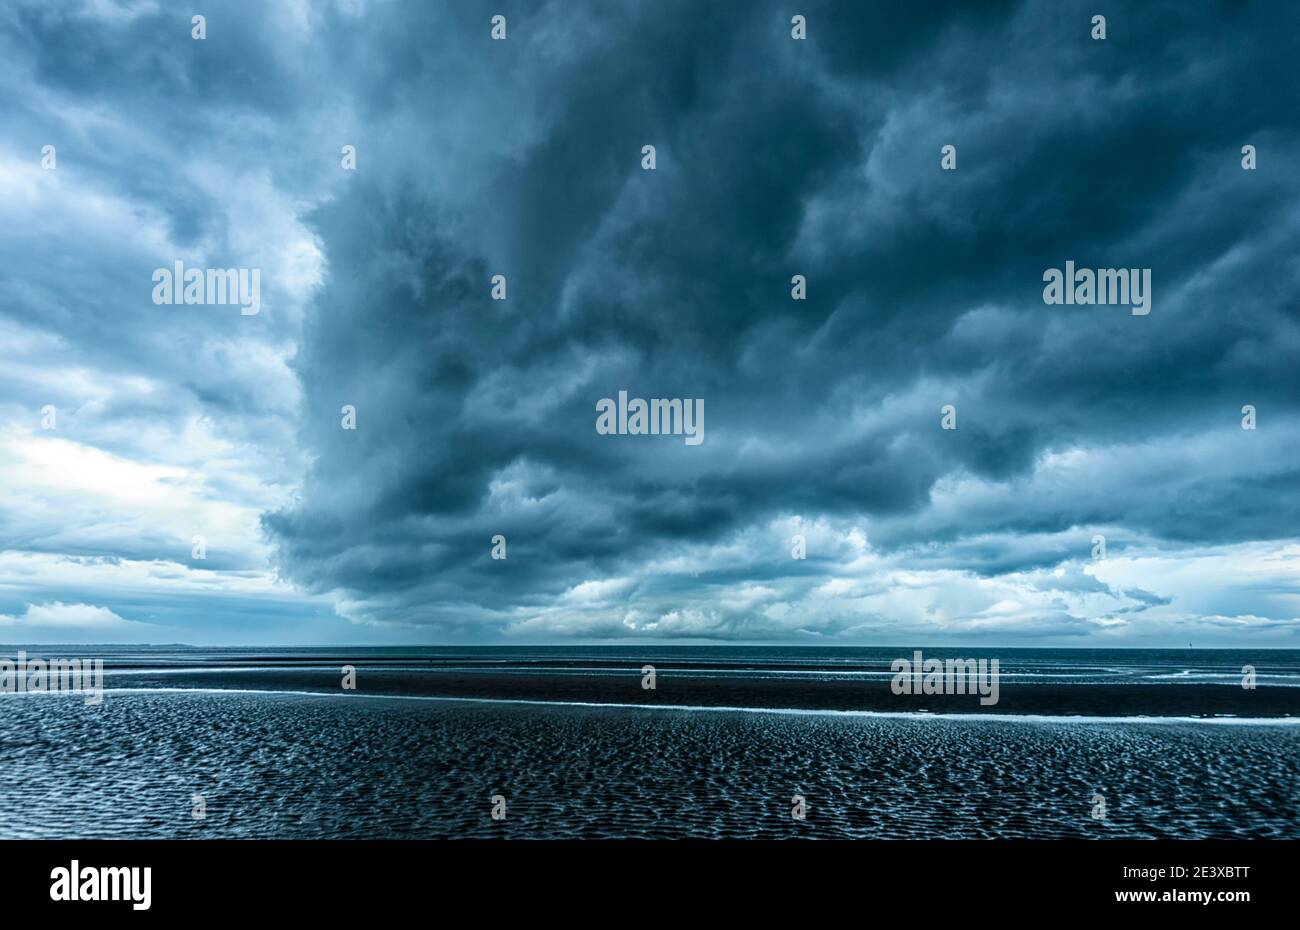 Severe storm with black clouds over the sea at Beachmere, Queensland, QLD, Australia Stock Photo